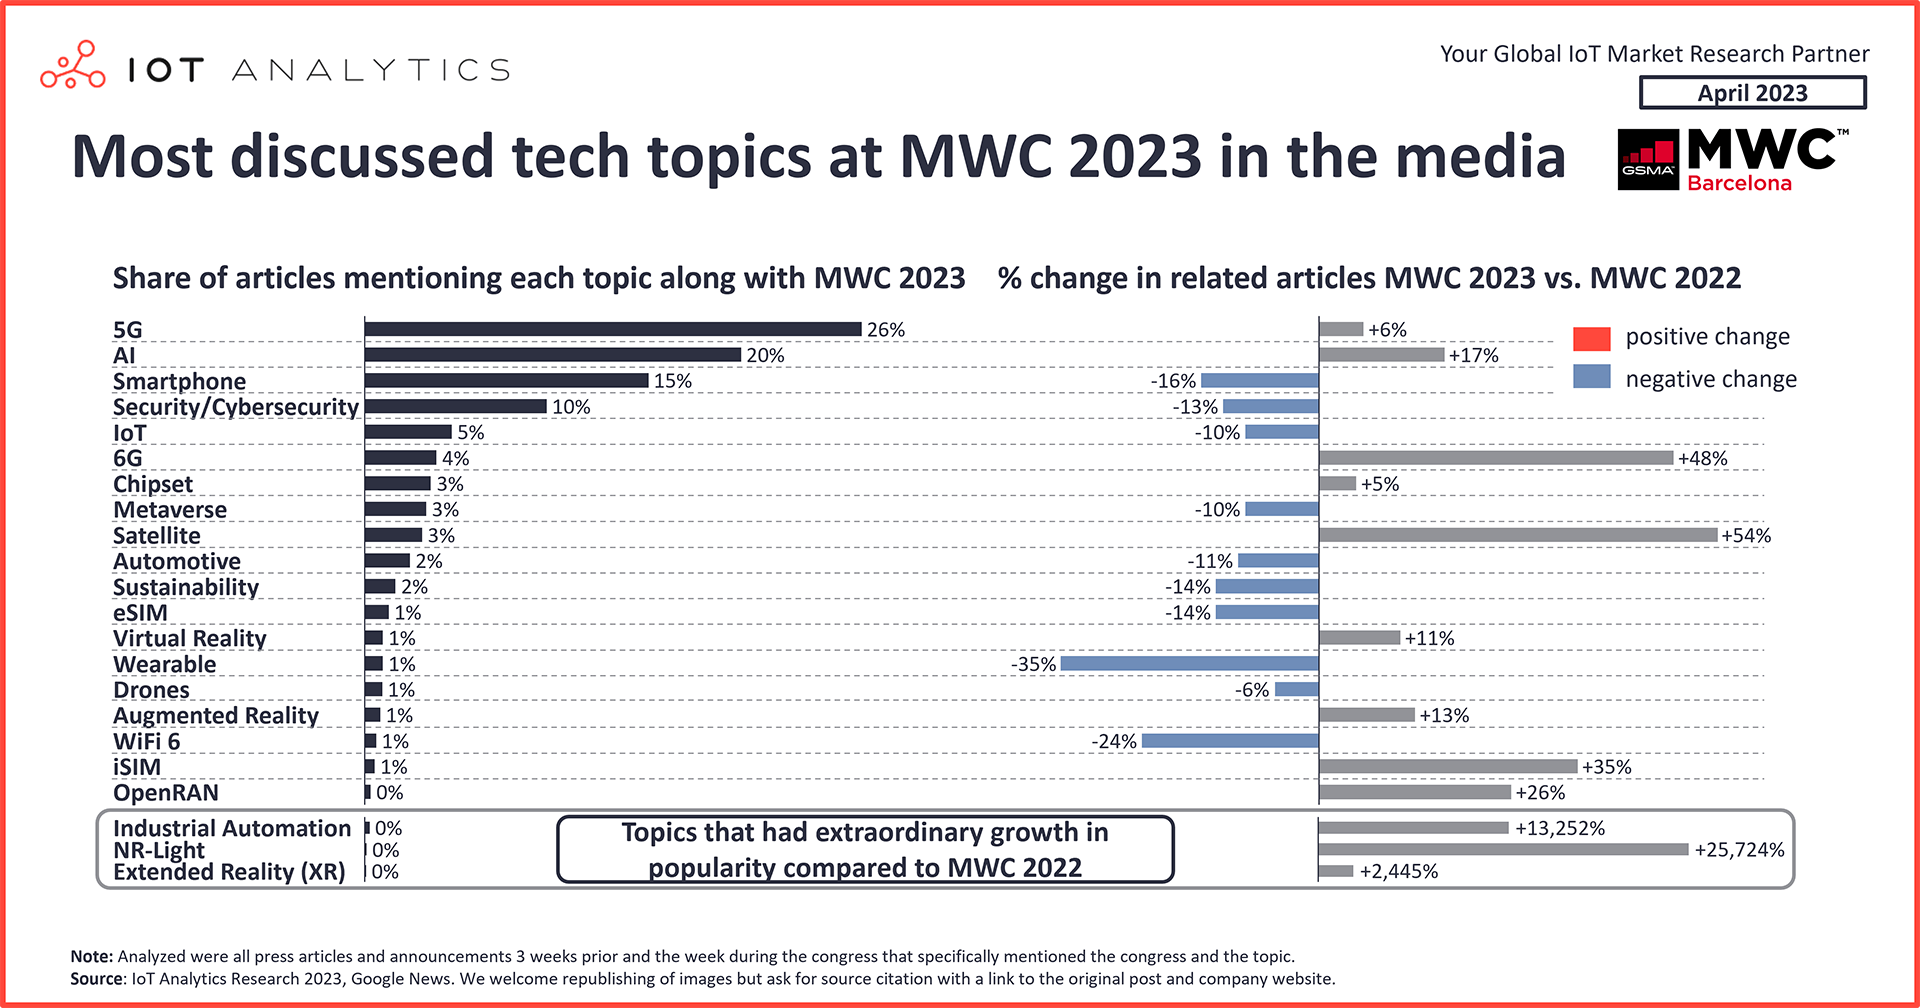 Most discussed tech topics at MWC 2023 in the media